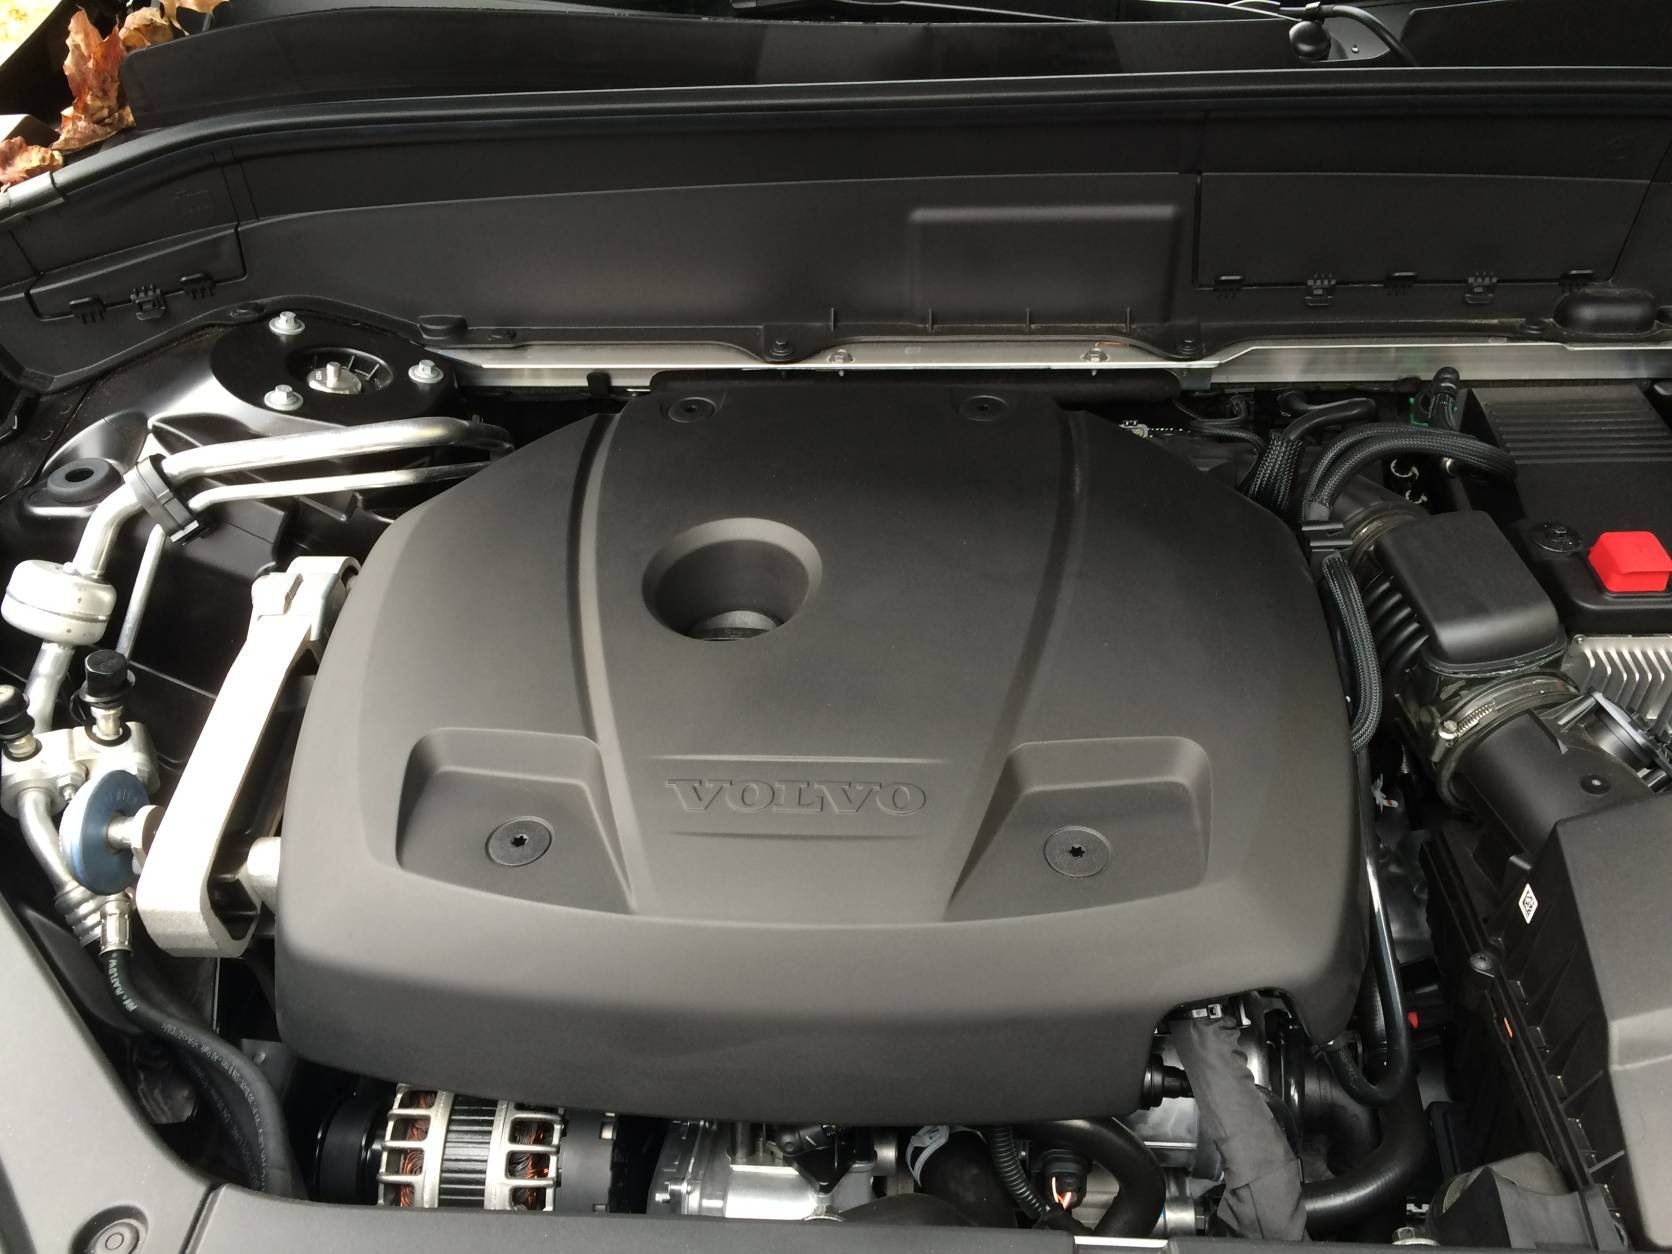 Most the midsize luxury SUV market use V6 engines. Not the Volvo XC-90. It has four cylinders with a twist: a supercharger and a turbo charger that makes 316 horsepower out of this small engine. (WTOP/Mike Parris)